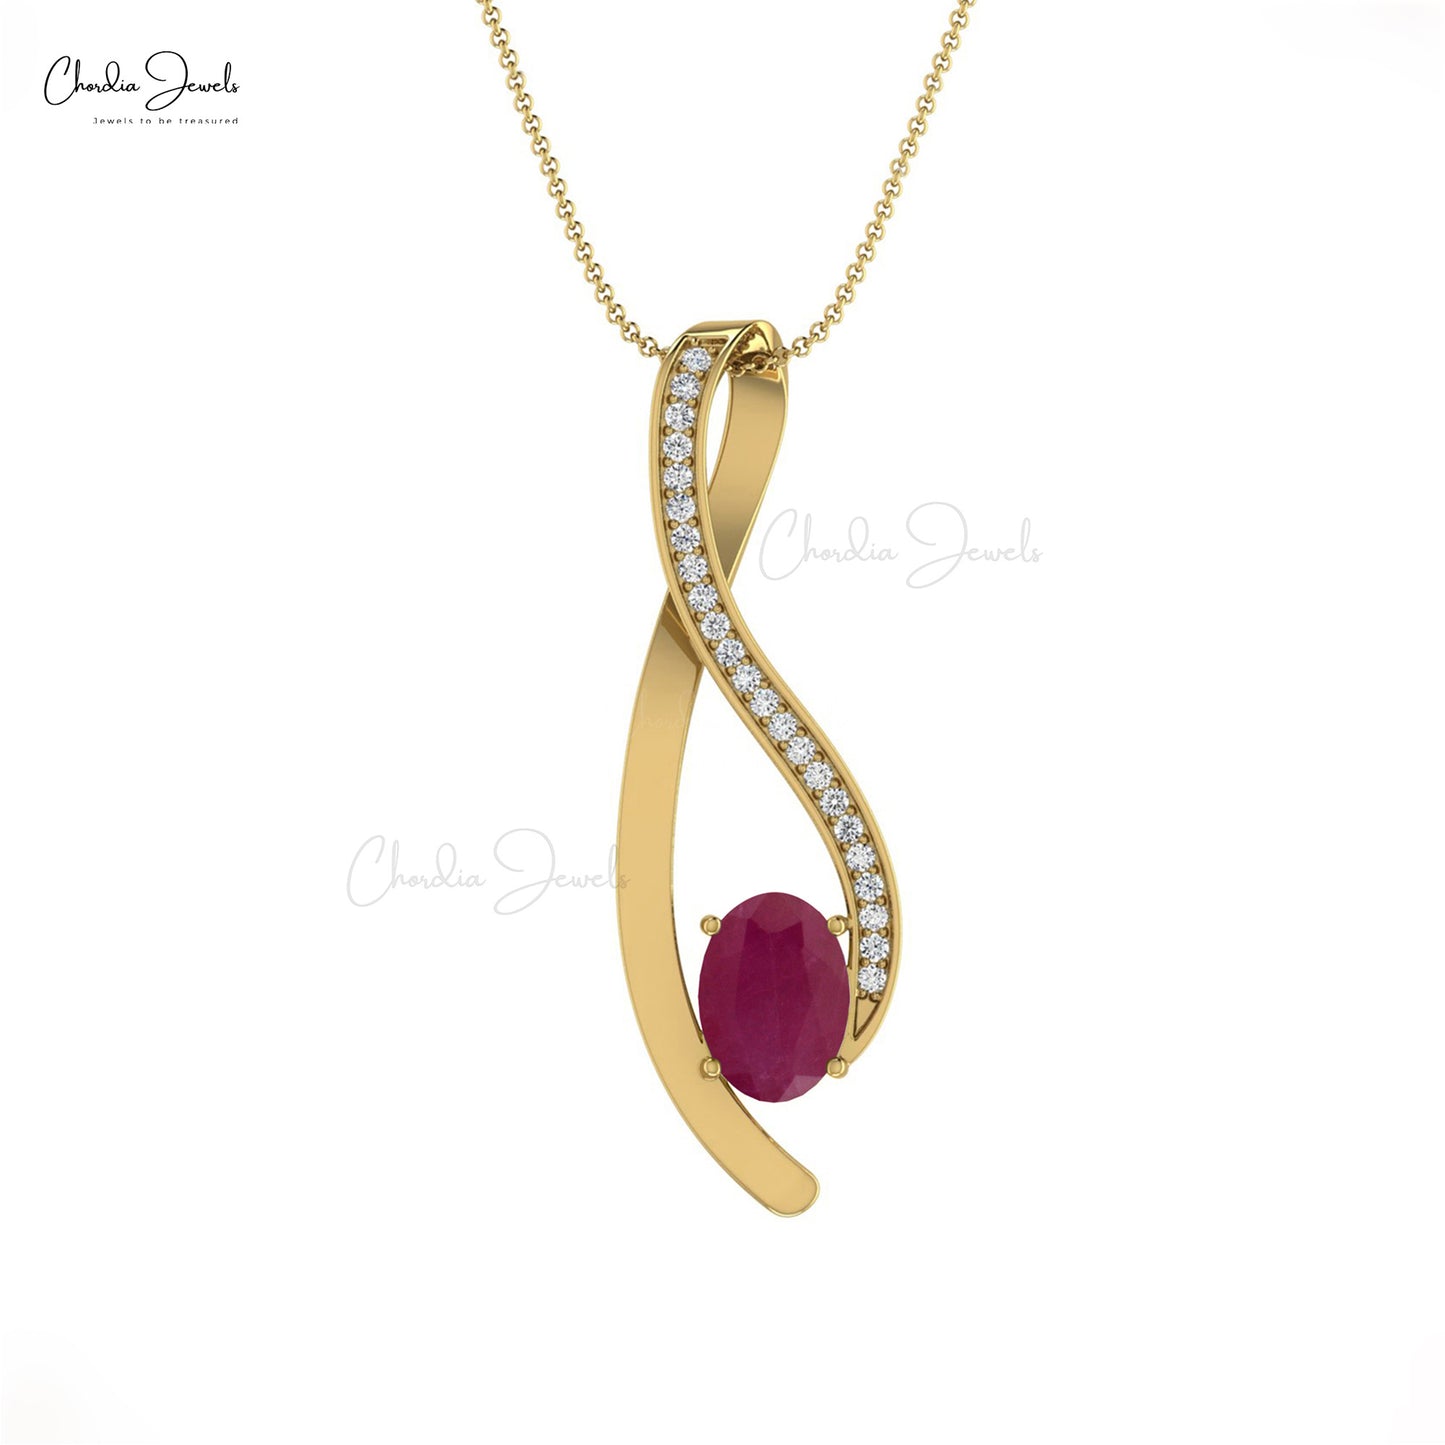 Real 14k Gold April Birthstone Pave Set White Diamond Overlay Pendant 6x4mm Oval Cut 0.58 Ct Natural Red Ruby Gemstone Pendant Necklace Jewelry For Women